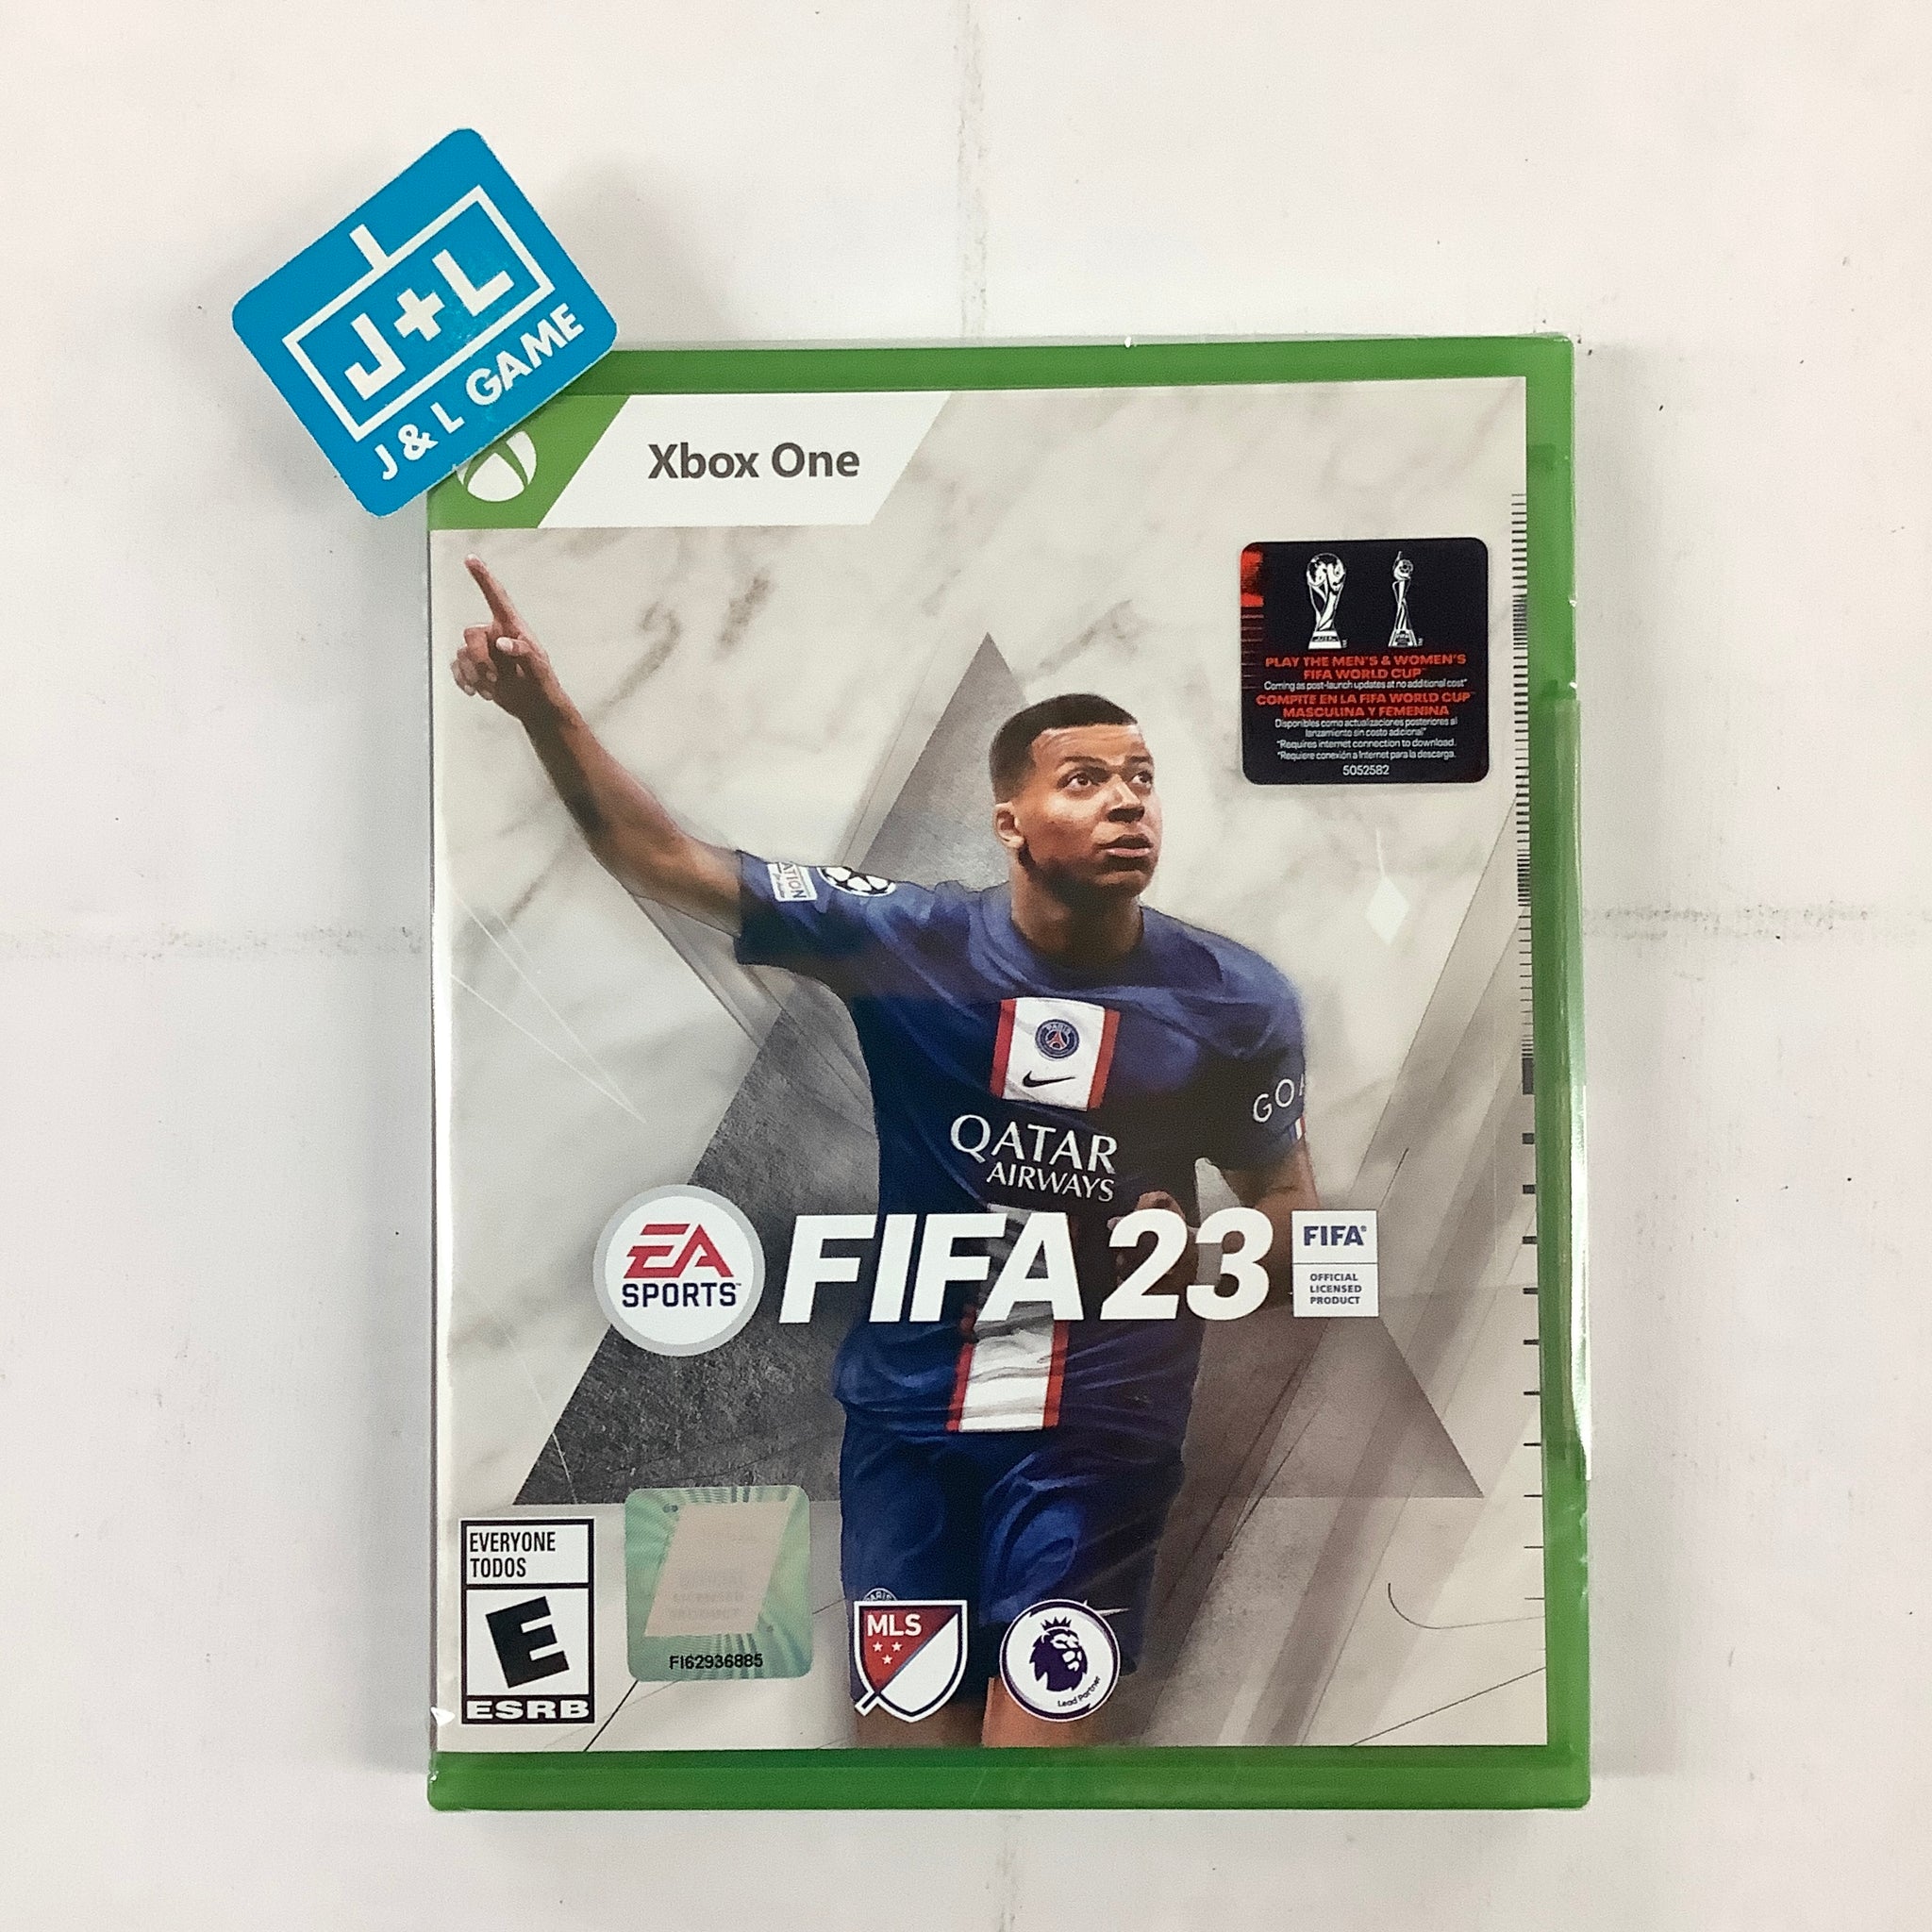 FIFA 23 for Xbox One [New Video Game] Xbox One